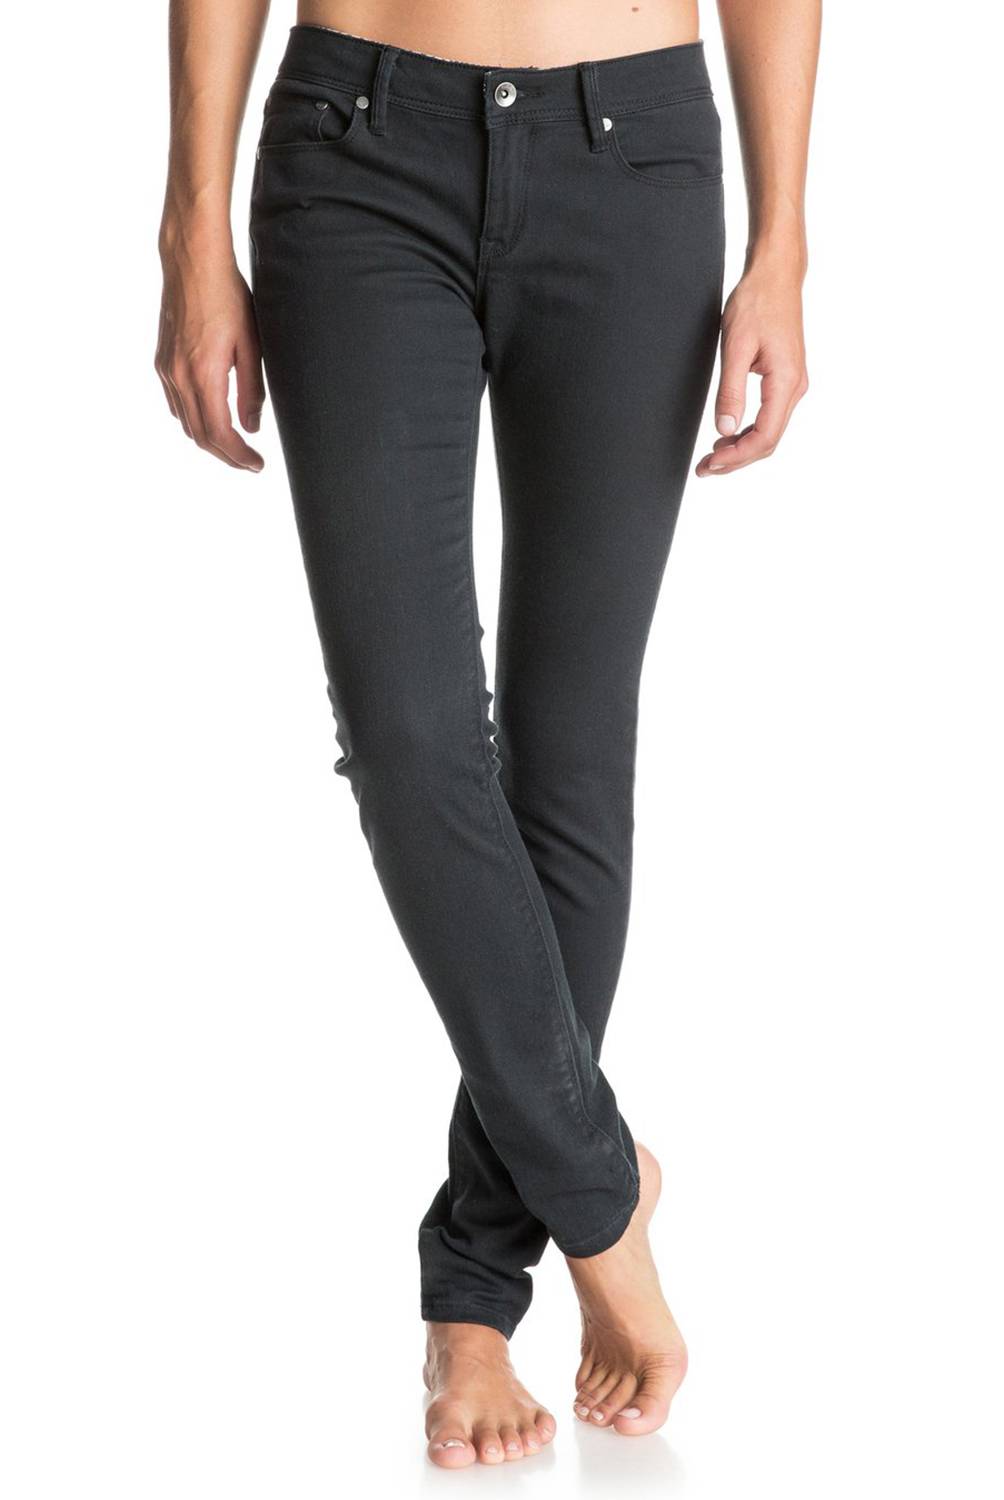 ROXY - Jeans Mujer